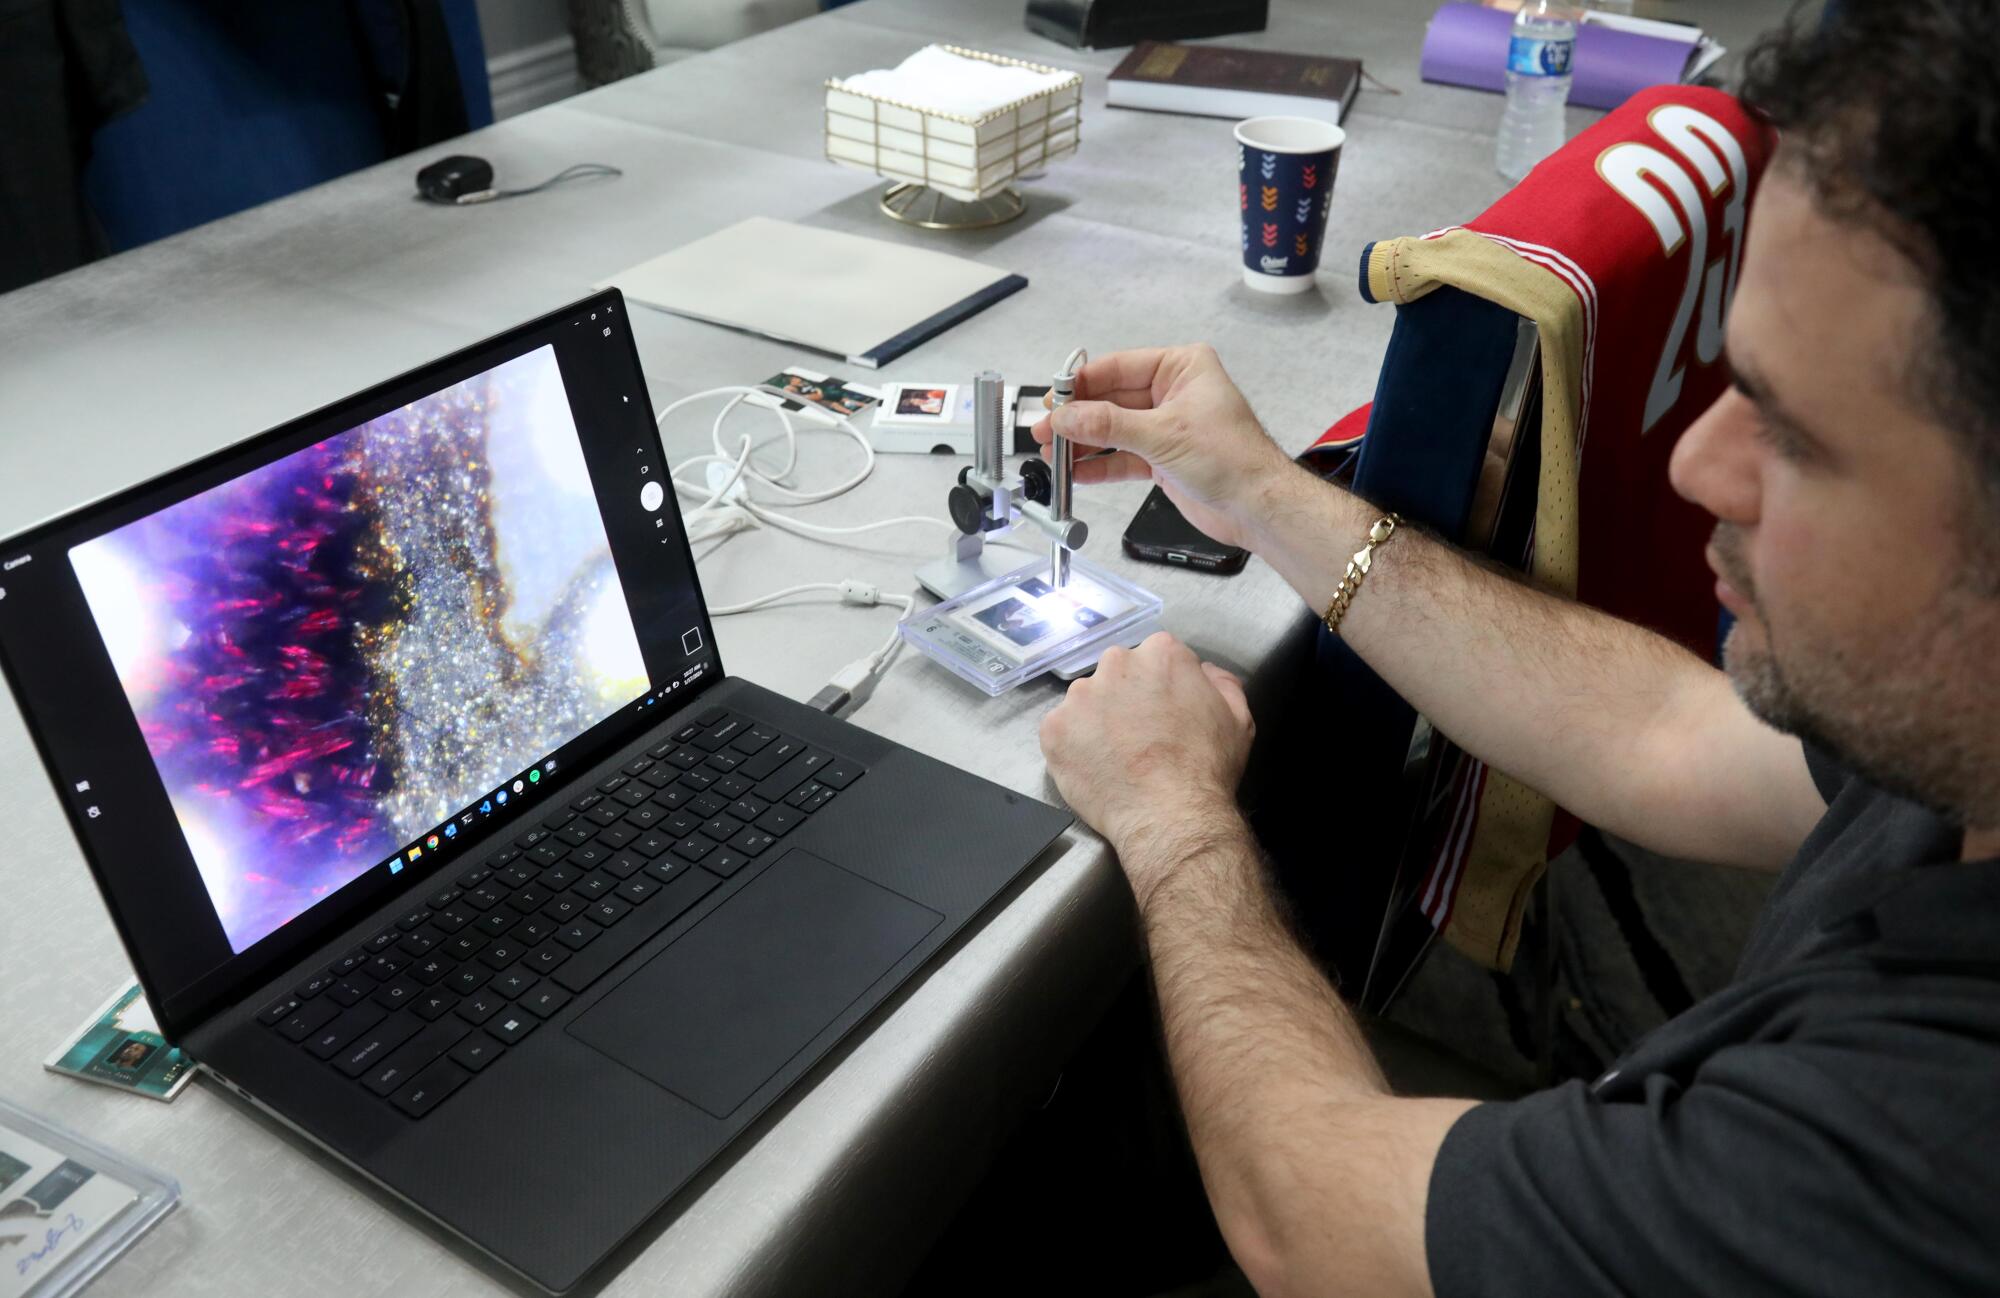 Software engineer Josh Bouganim uses a microscope to magnify a swatch of a jersey worn by LeBron James